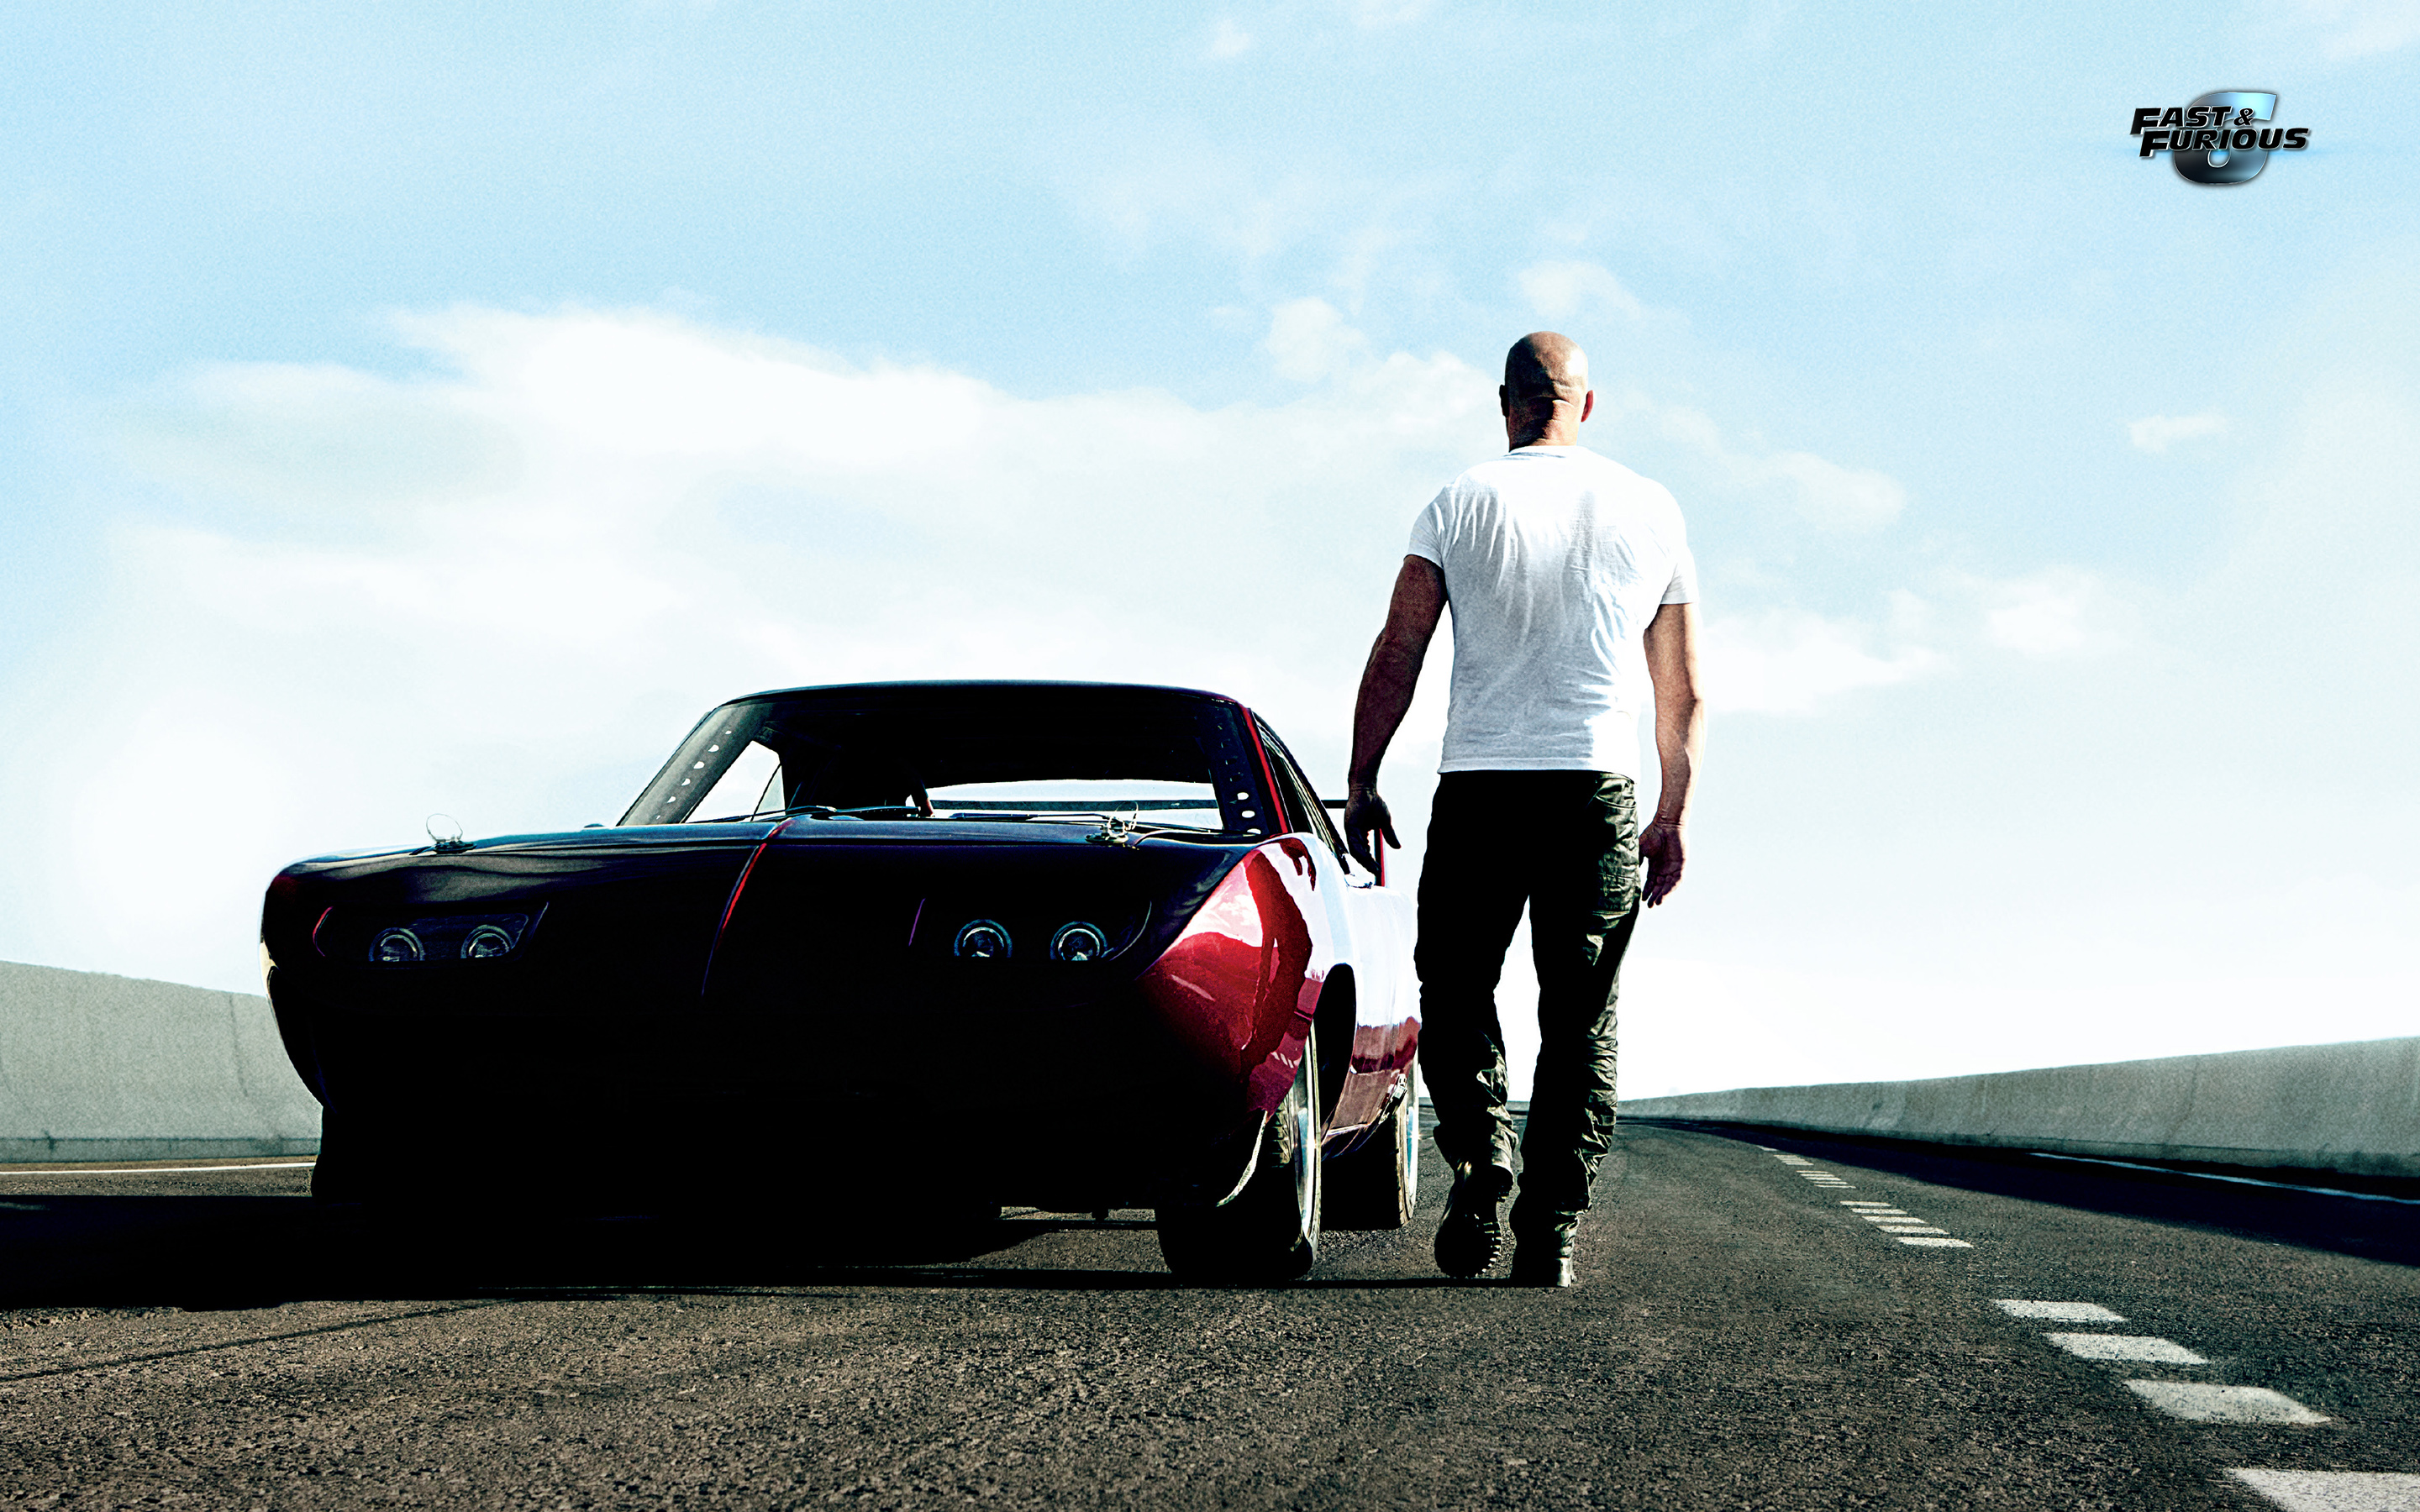 HQ Fast & Furious 6 Wallpapers | File 1935.94Kb